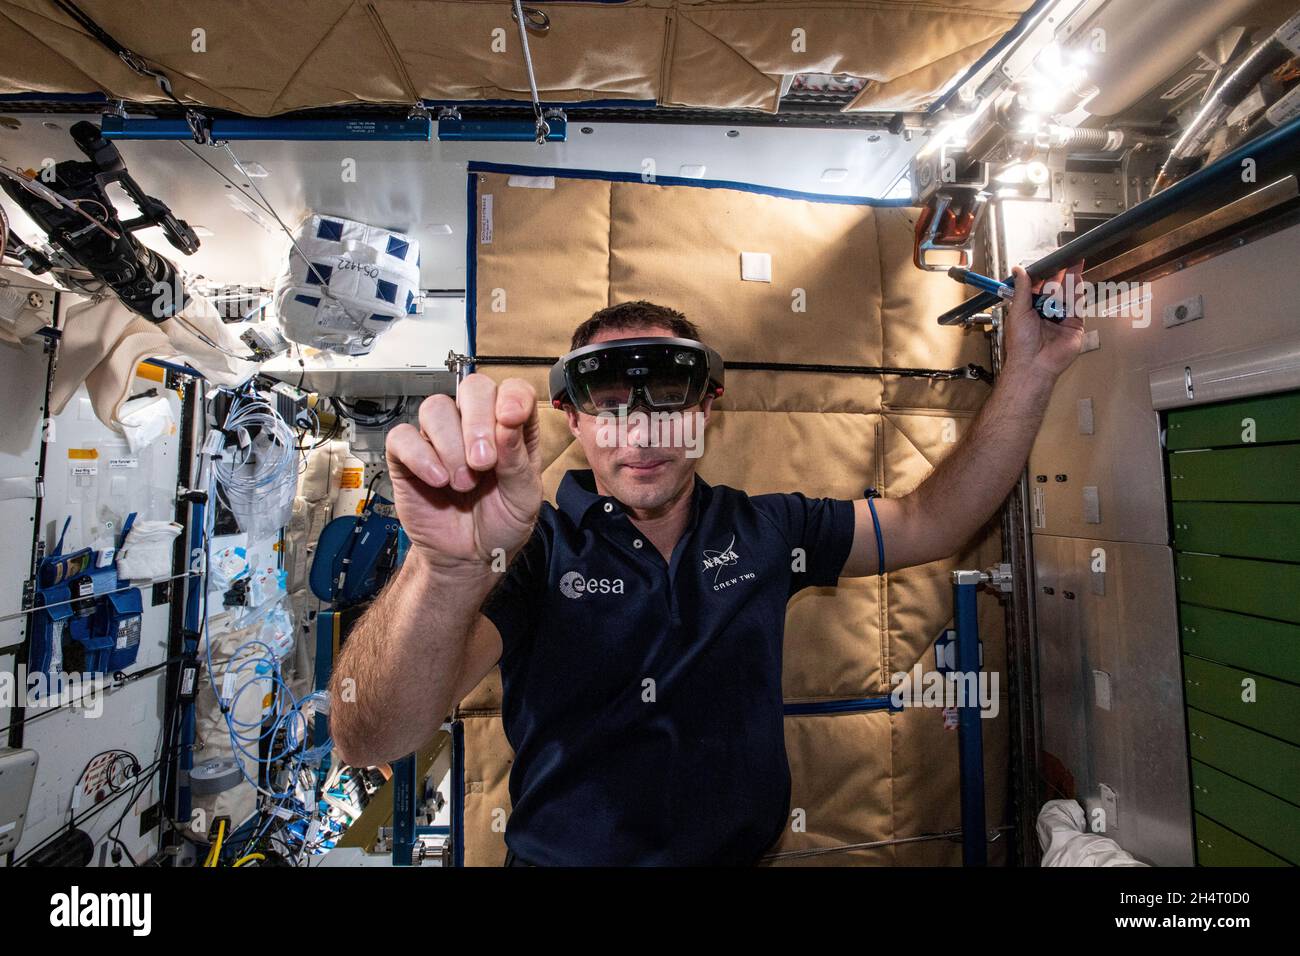 Expedition 65 Flight Engineer Thomas Pesquet of ESA (European Space Agency) wears the Sidekick augmented reality goggles that assist crew members during operations with science experiments and orbital maintenance tasks on July 6, 2021. Credit: NASA via CNP Stock Photo